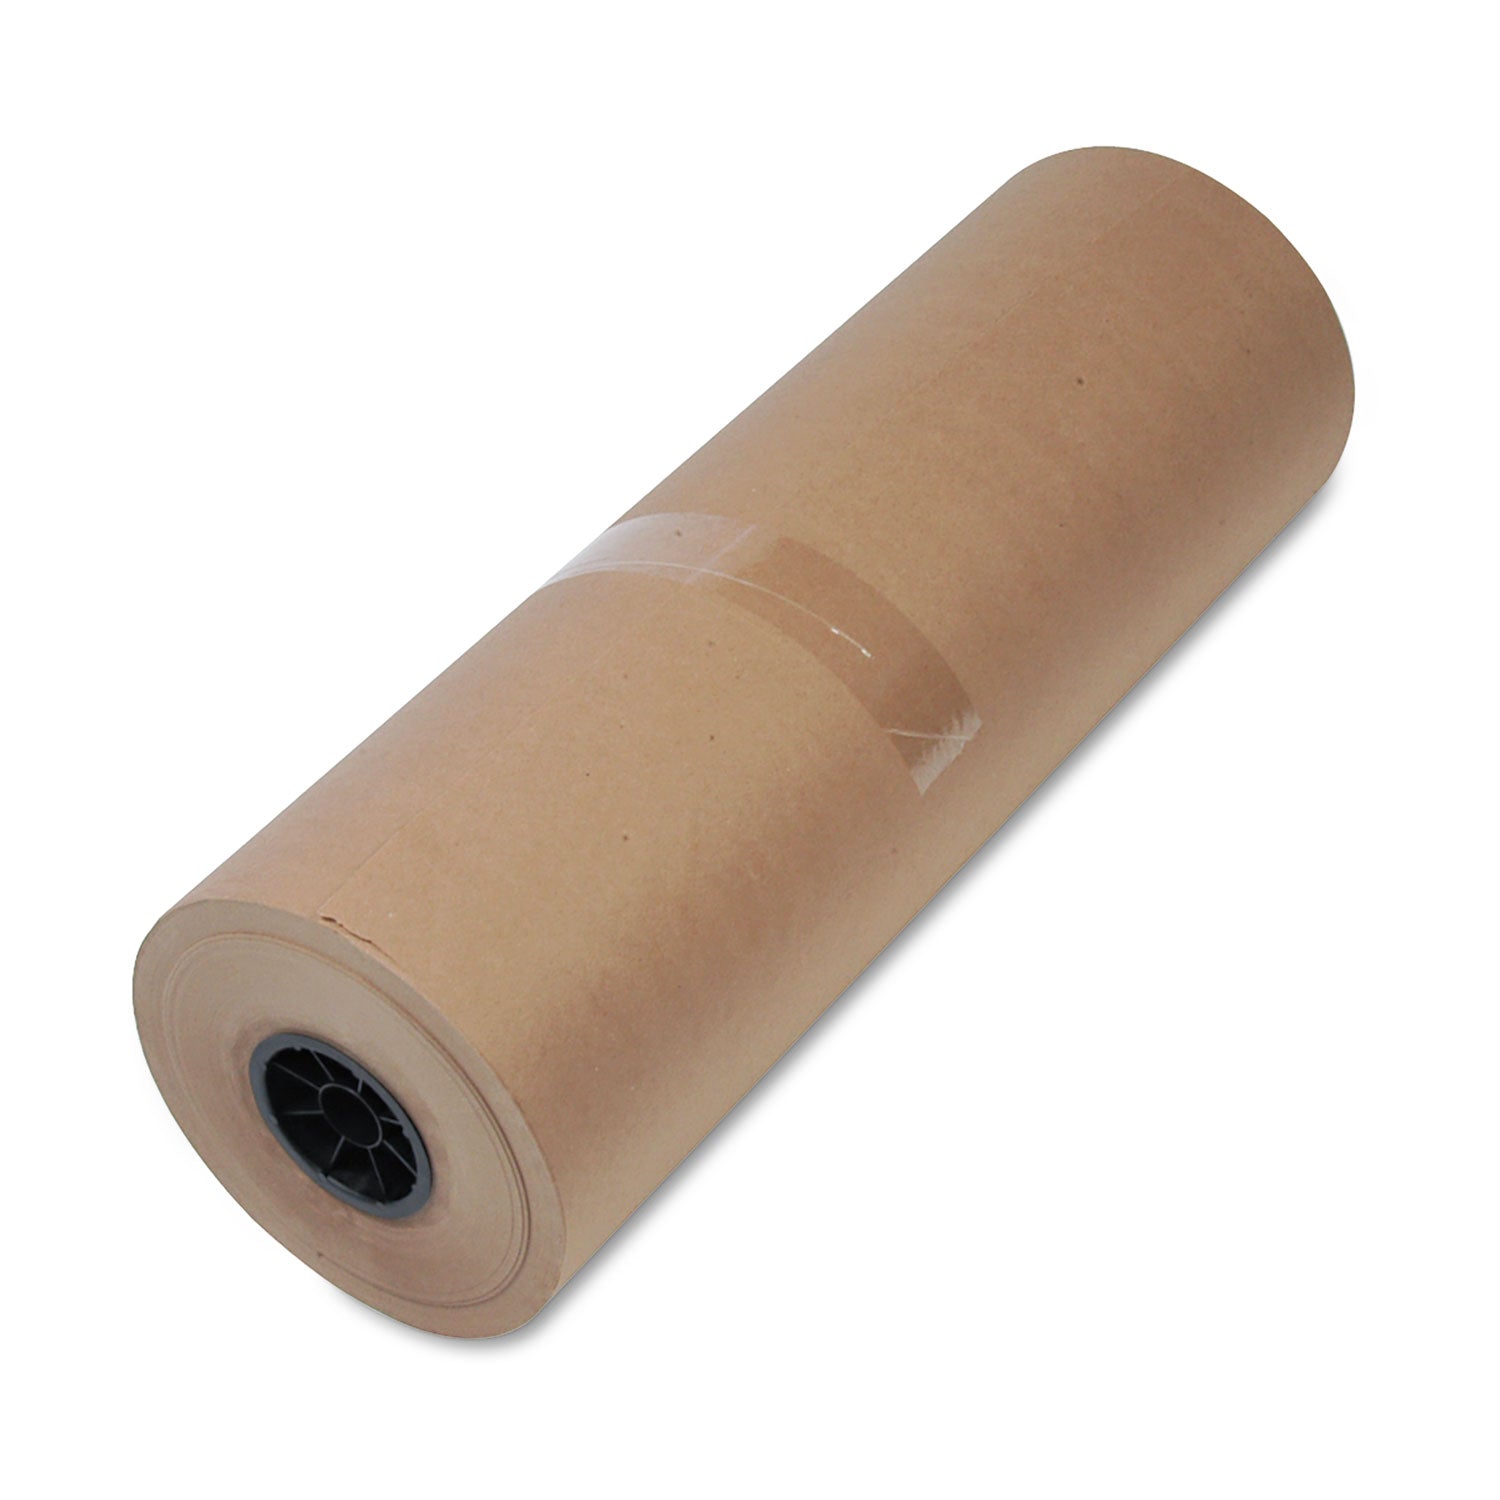 high-volume-mediumweight-wrapping-paper-roll-40-lb-wrapping-weight-stock-24-x-900-ft-brown_unv1300022 - 1